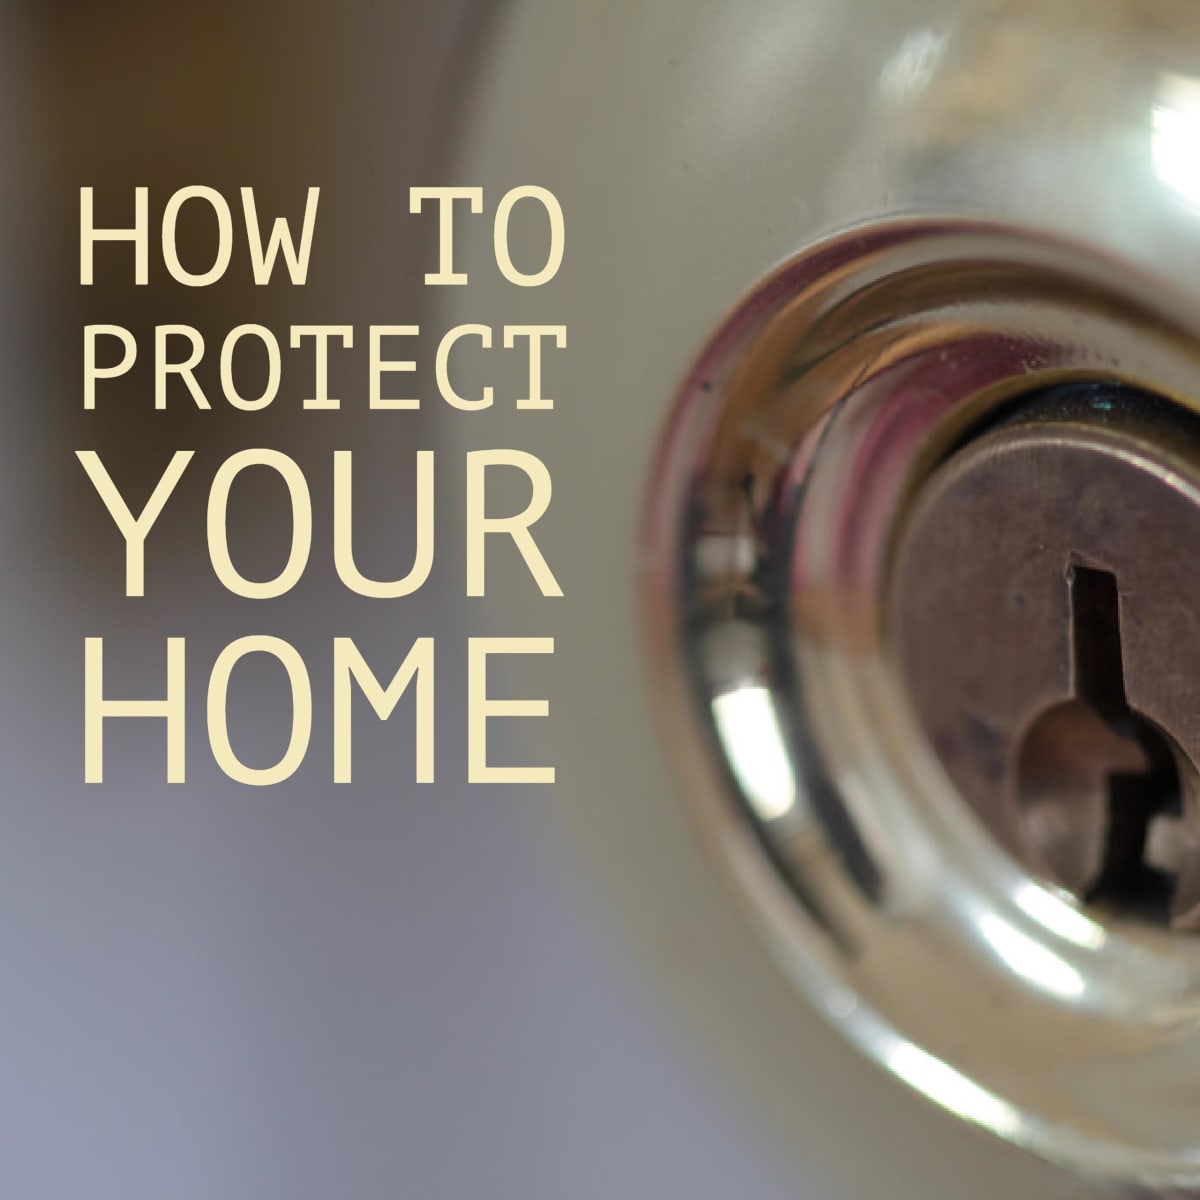 How to Improve Home Security in 14 Easy pic